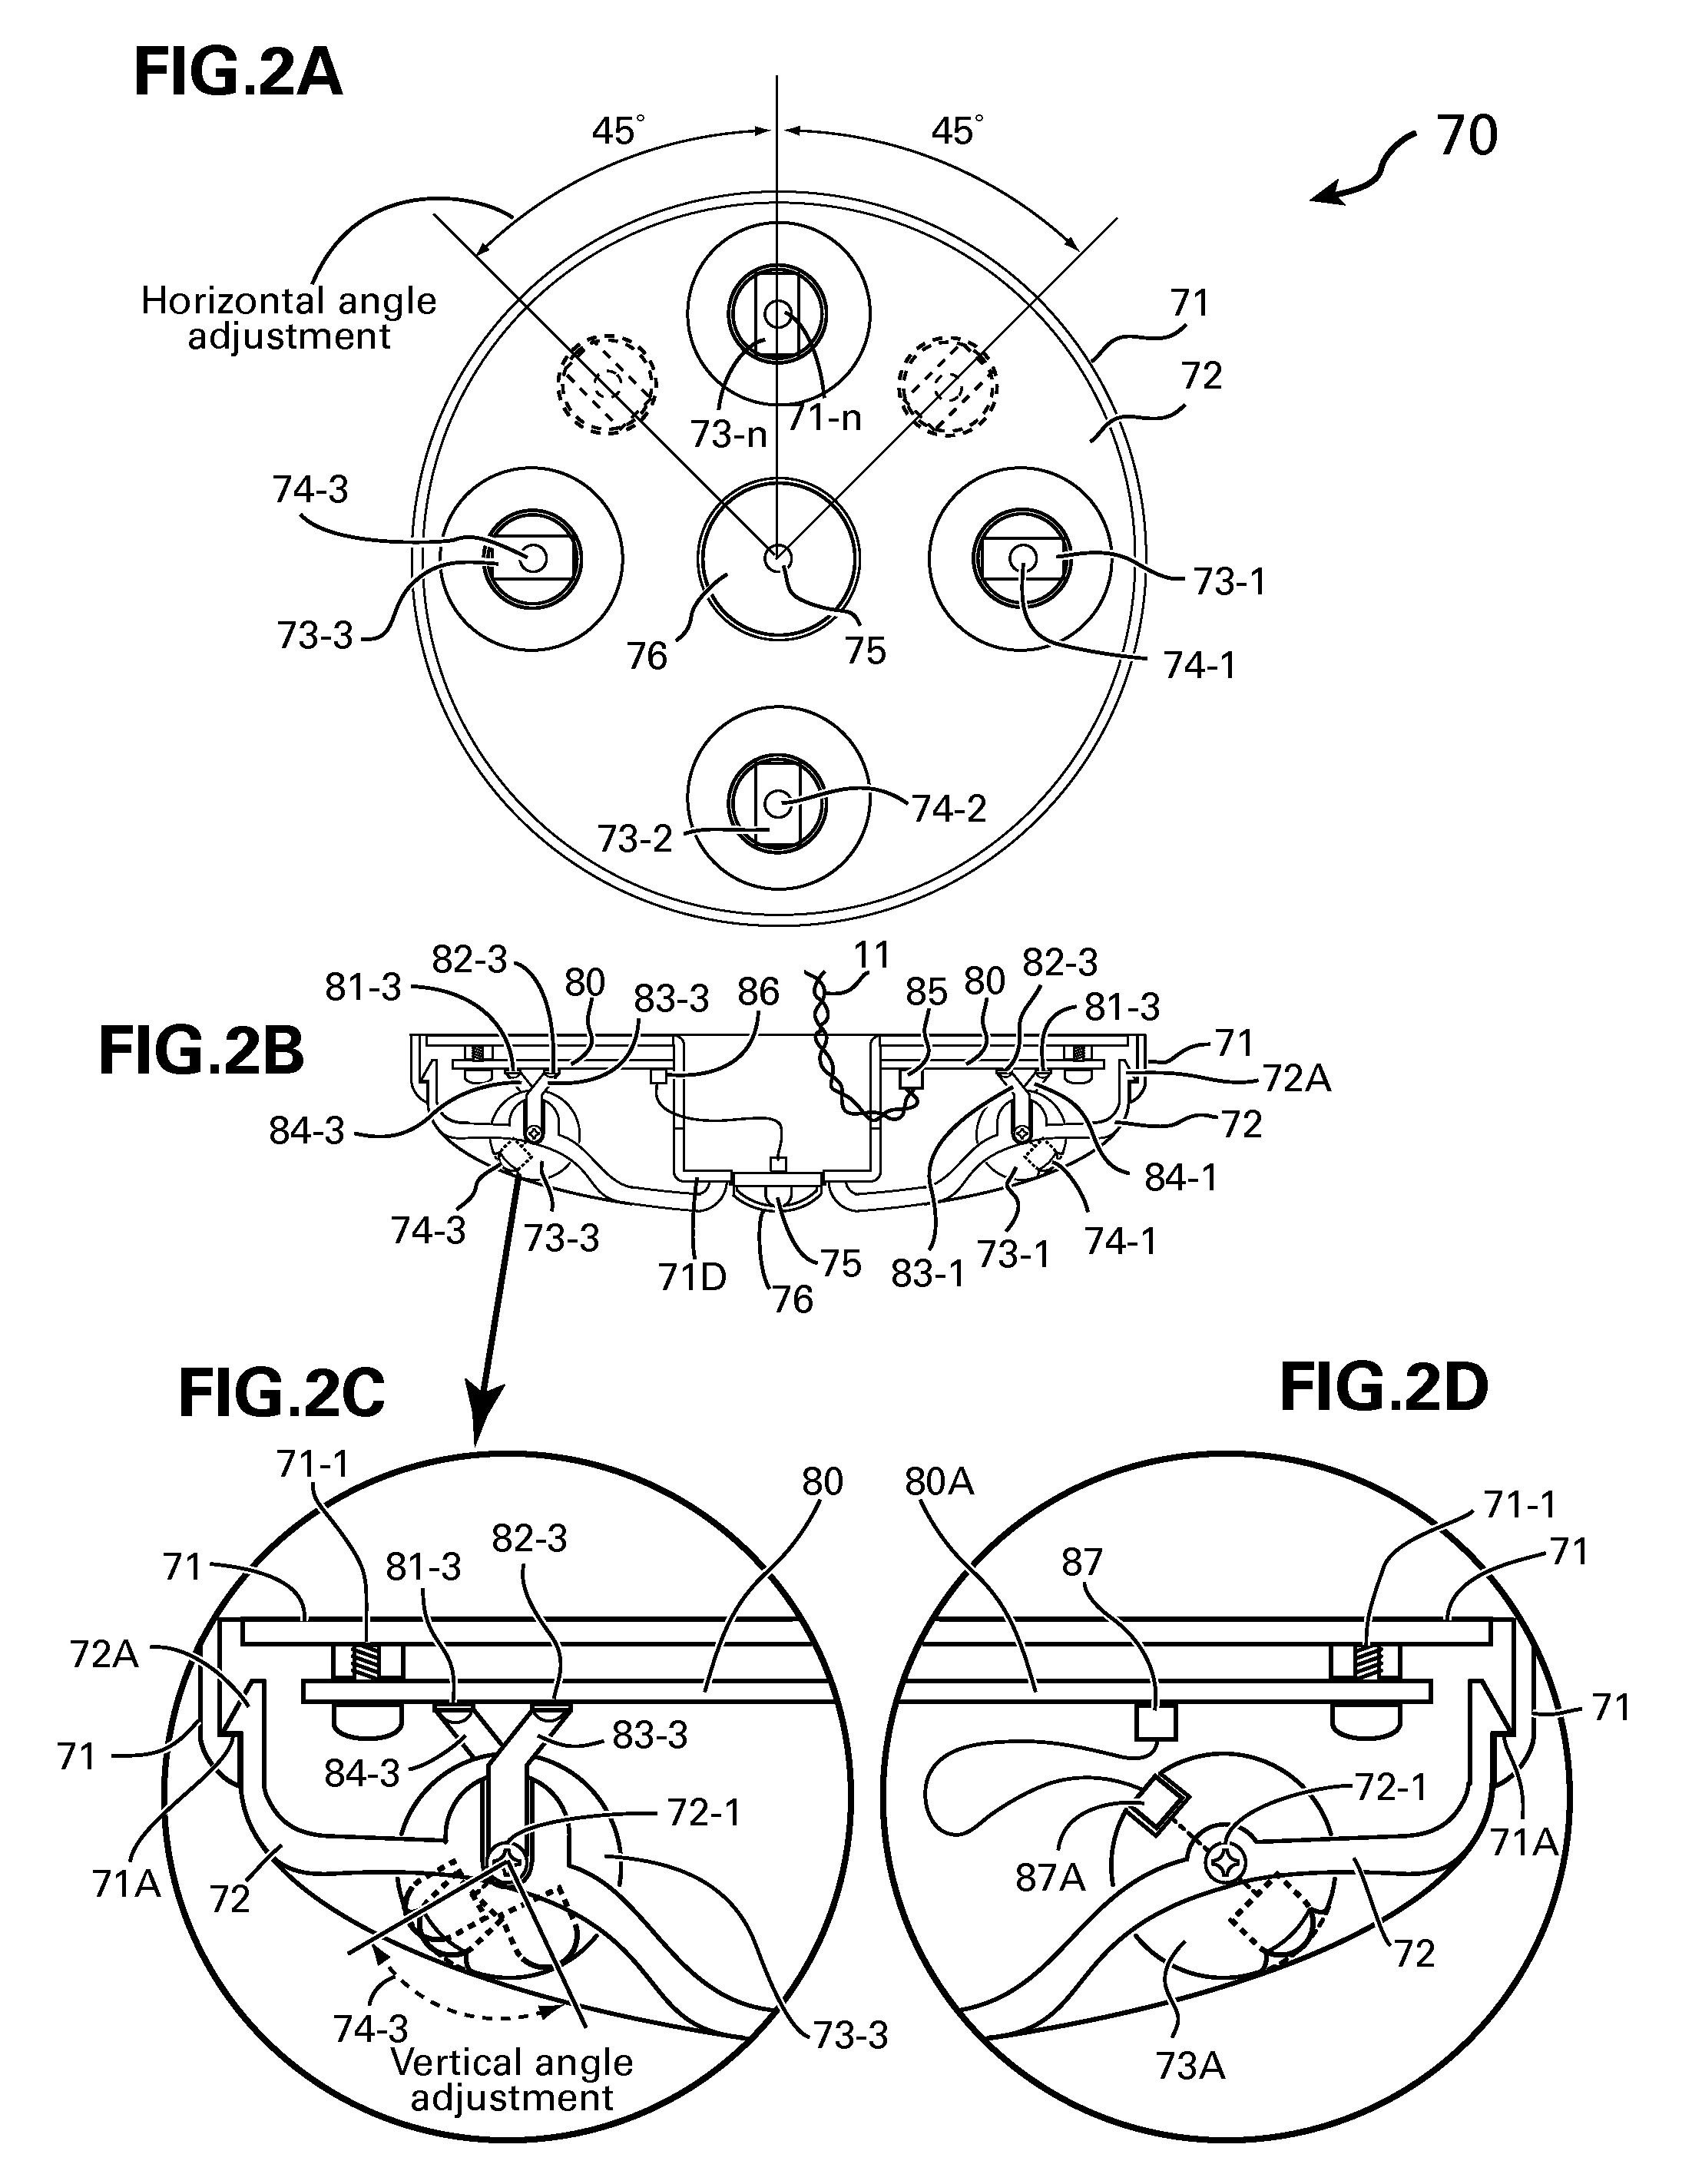 Method and apparatus for operating AC powered appliances via video interphones, two way IR drivers and remote control devices